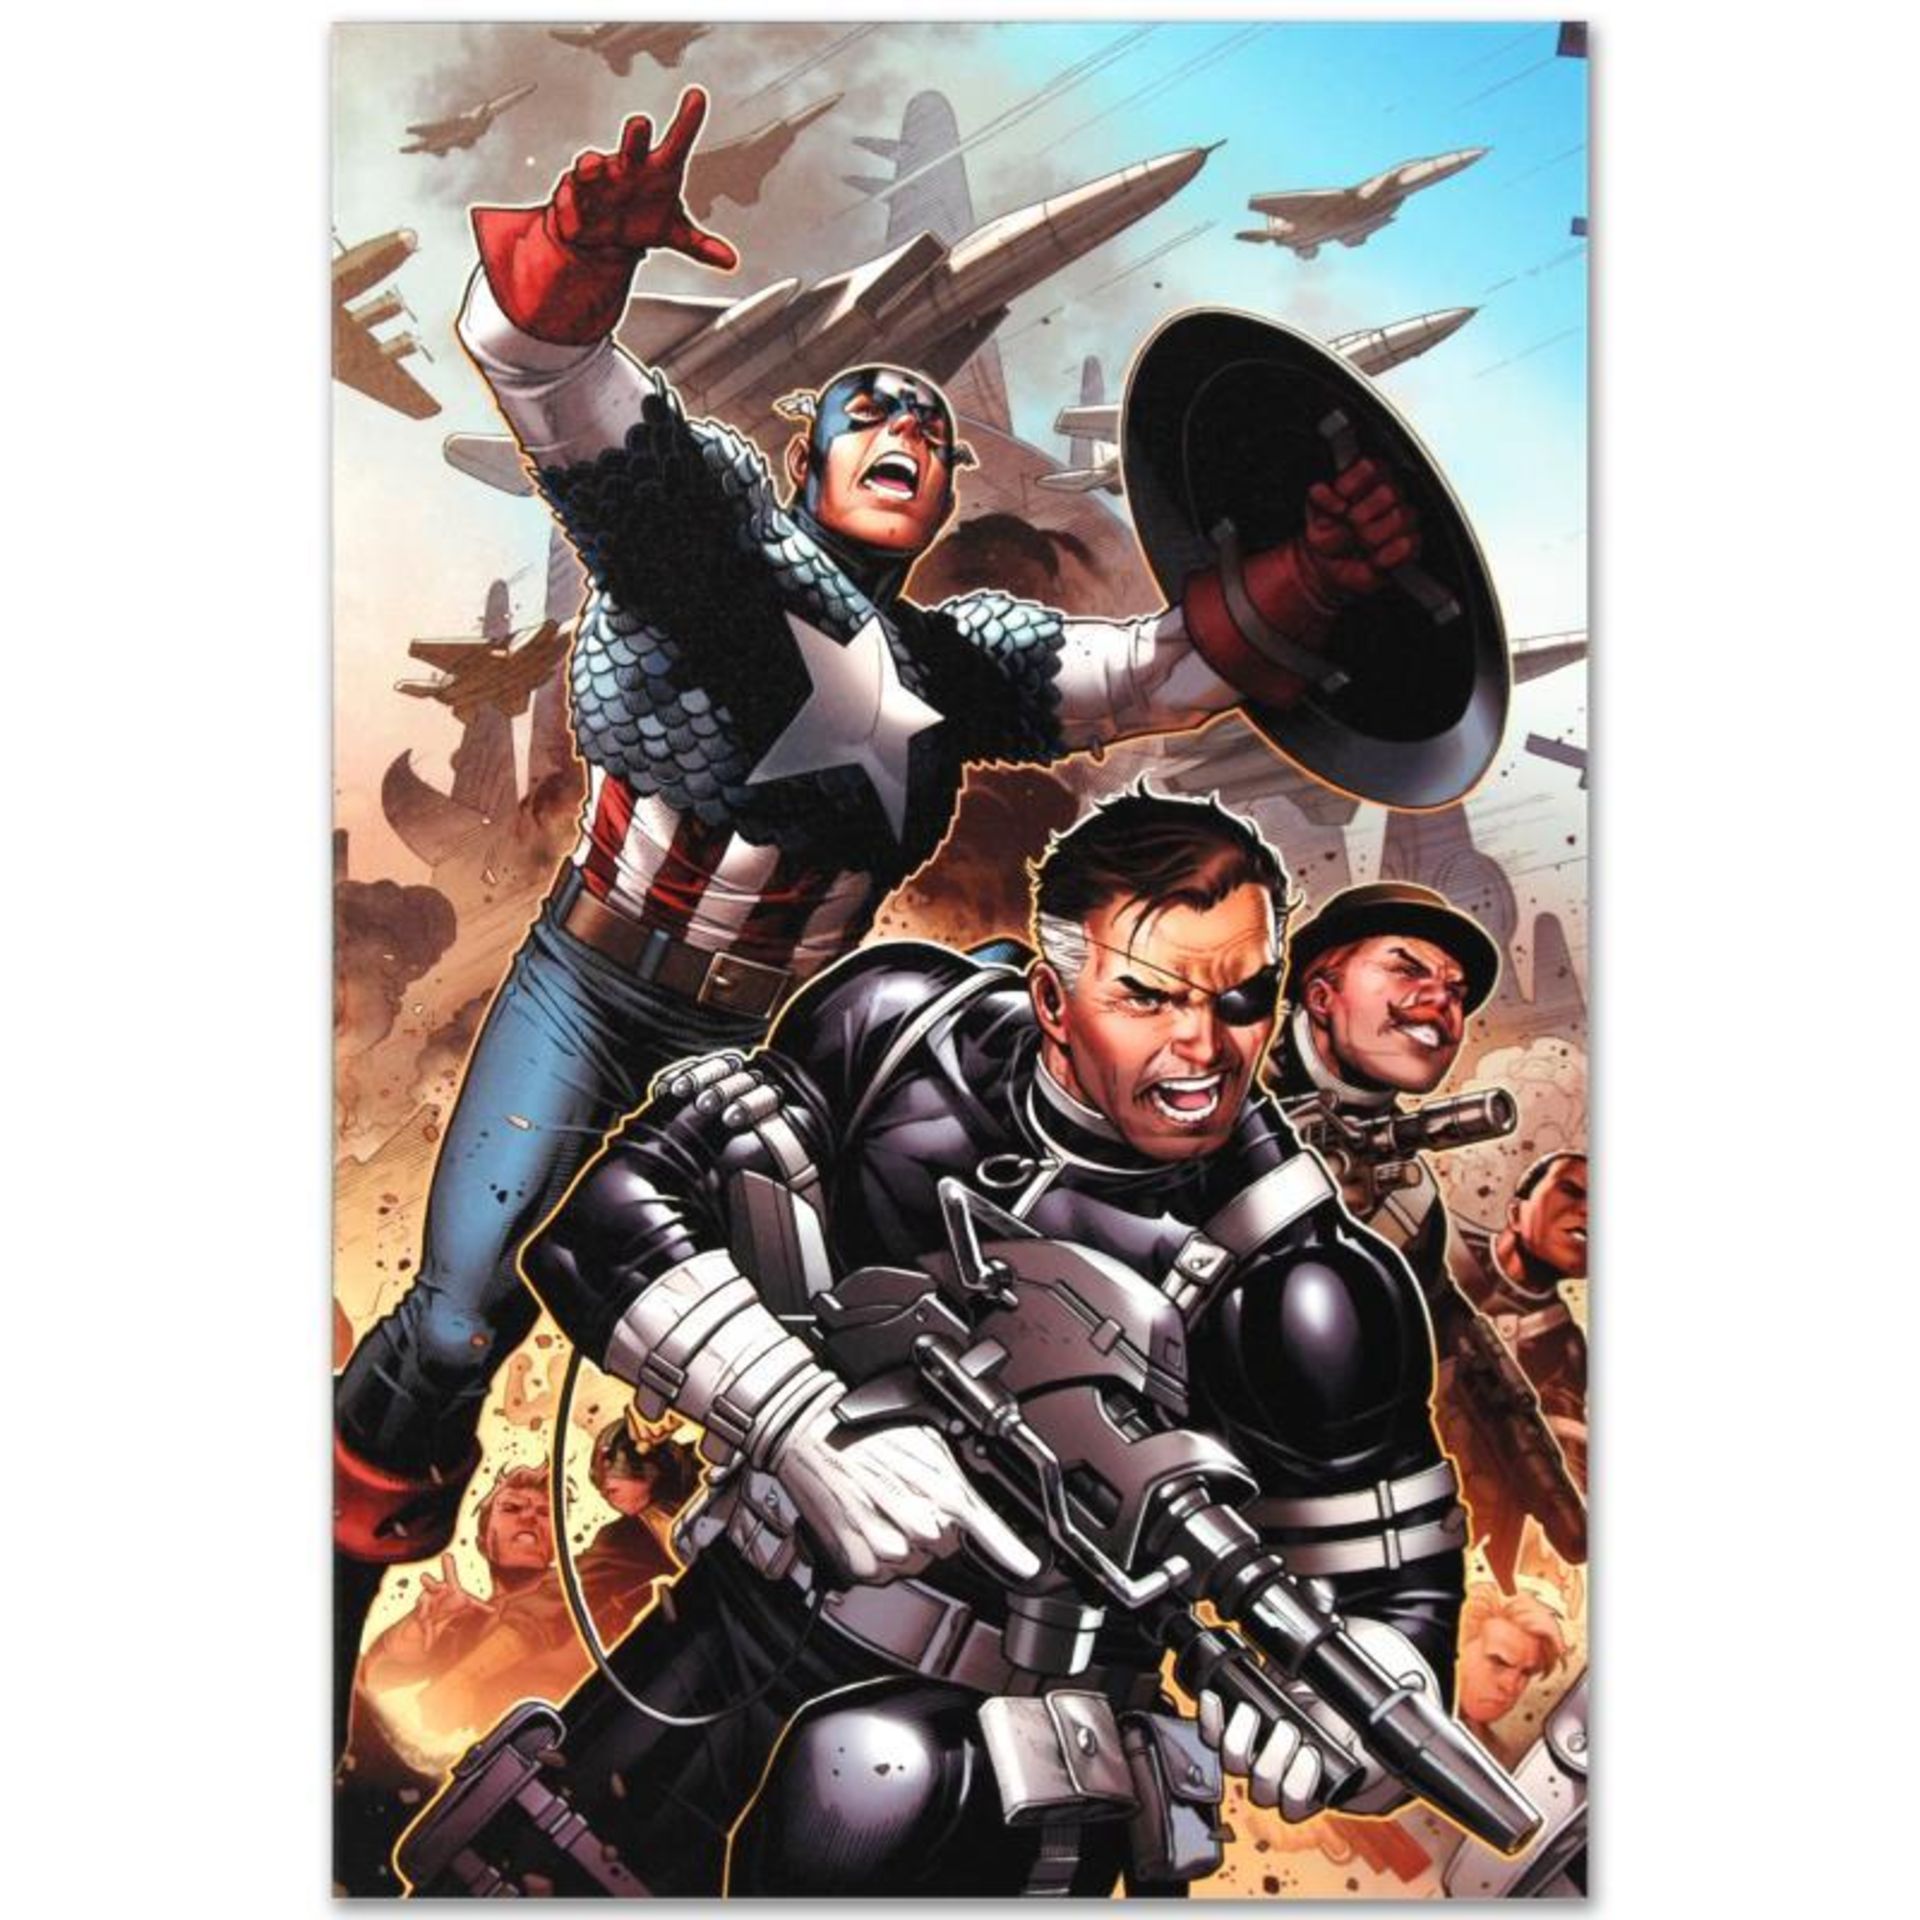 Marvel Comics "Secret Warriors #18" Numbered Limited Edition Giclee on Canvas by